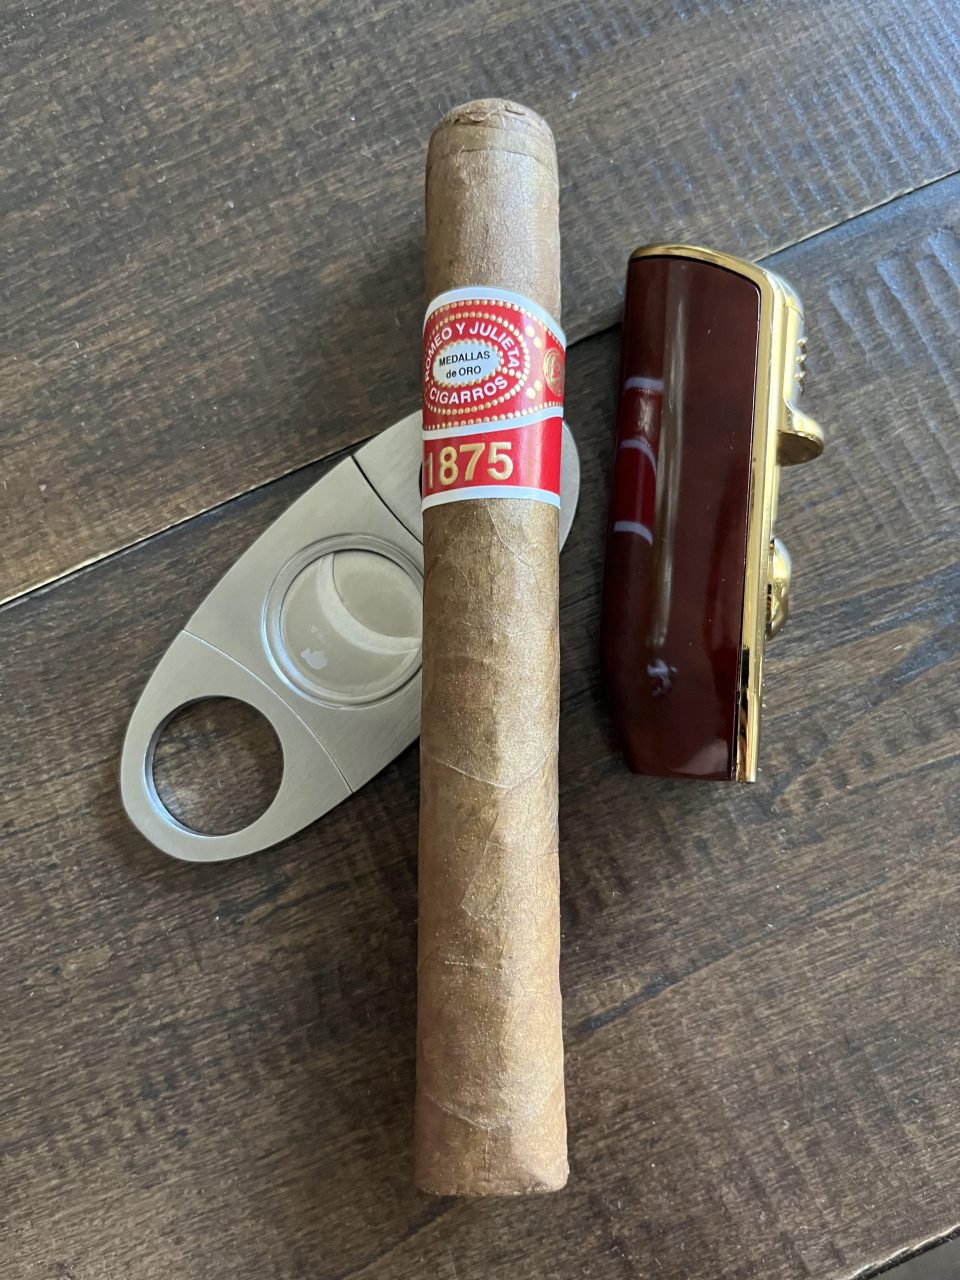 Romeo y Julieta Cigars - Pairing Suggestions and Serving Tips